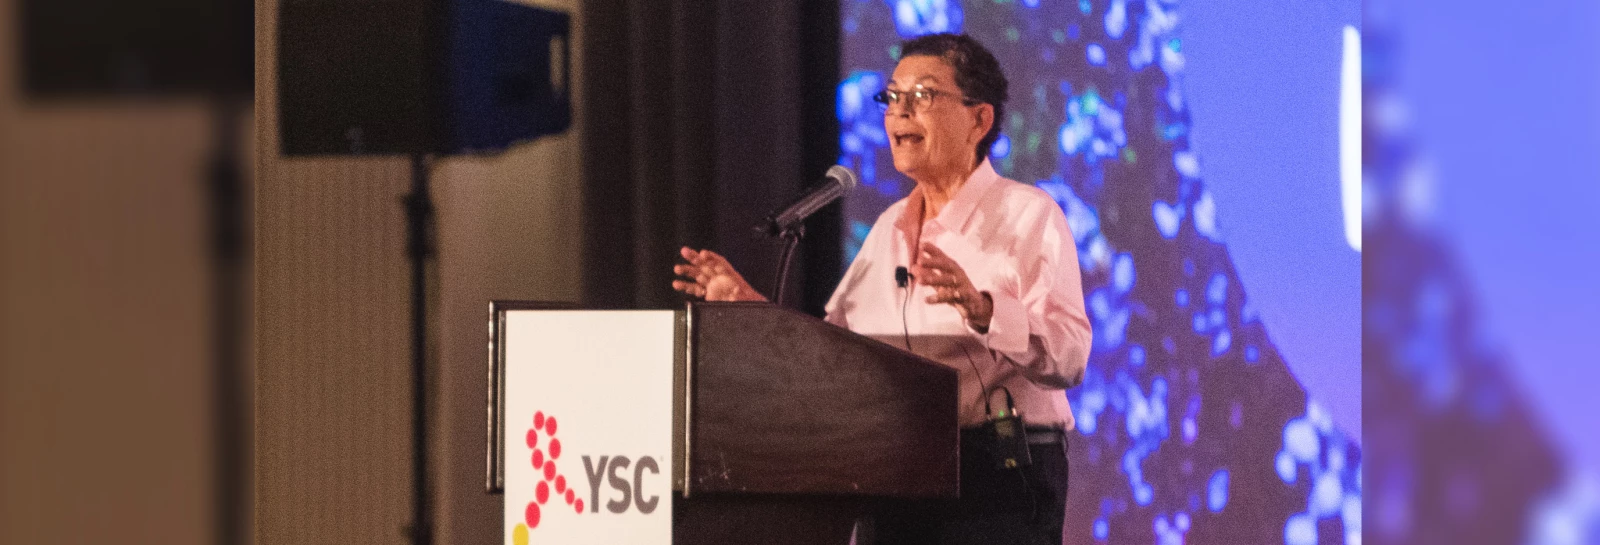 A Legacy of Love: YSC Honors and Remembers Dr. Susan Love